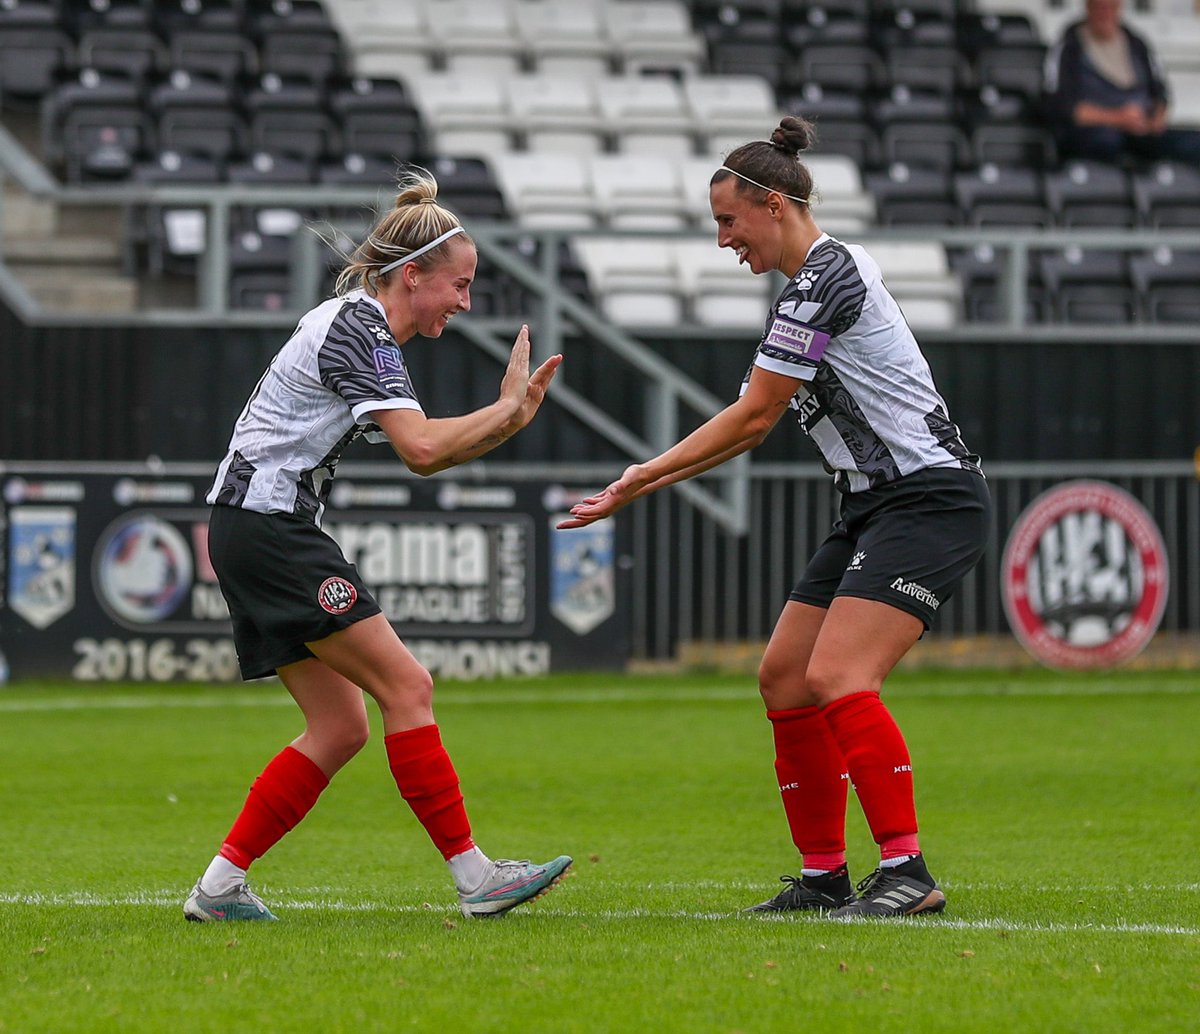 MAIDENHEAD | The Mapgies have swooped into the final with a late goal to make it 2-1 against Watford Development. Another chance at some silverware, having last won the North Hampshire FA Women’s Cup in 2016. Congratulations to @EdJ_N23 and his team! 📸 @DarrenWoolley2